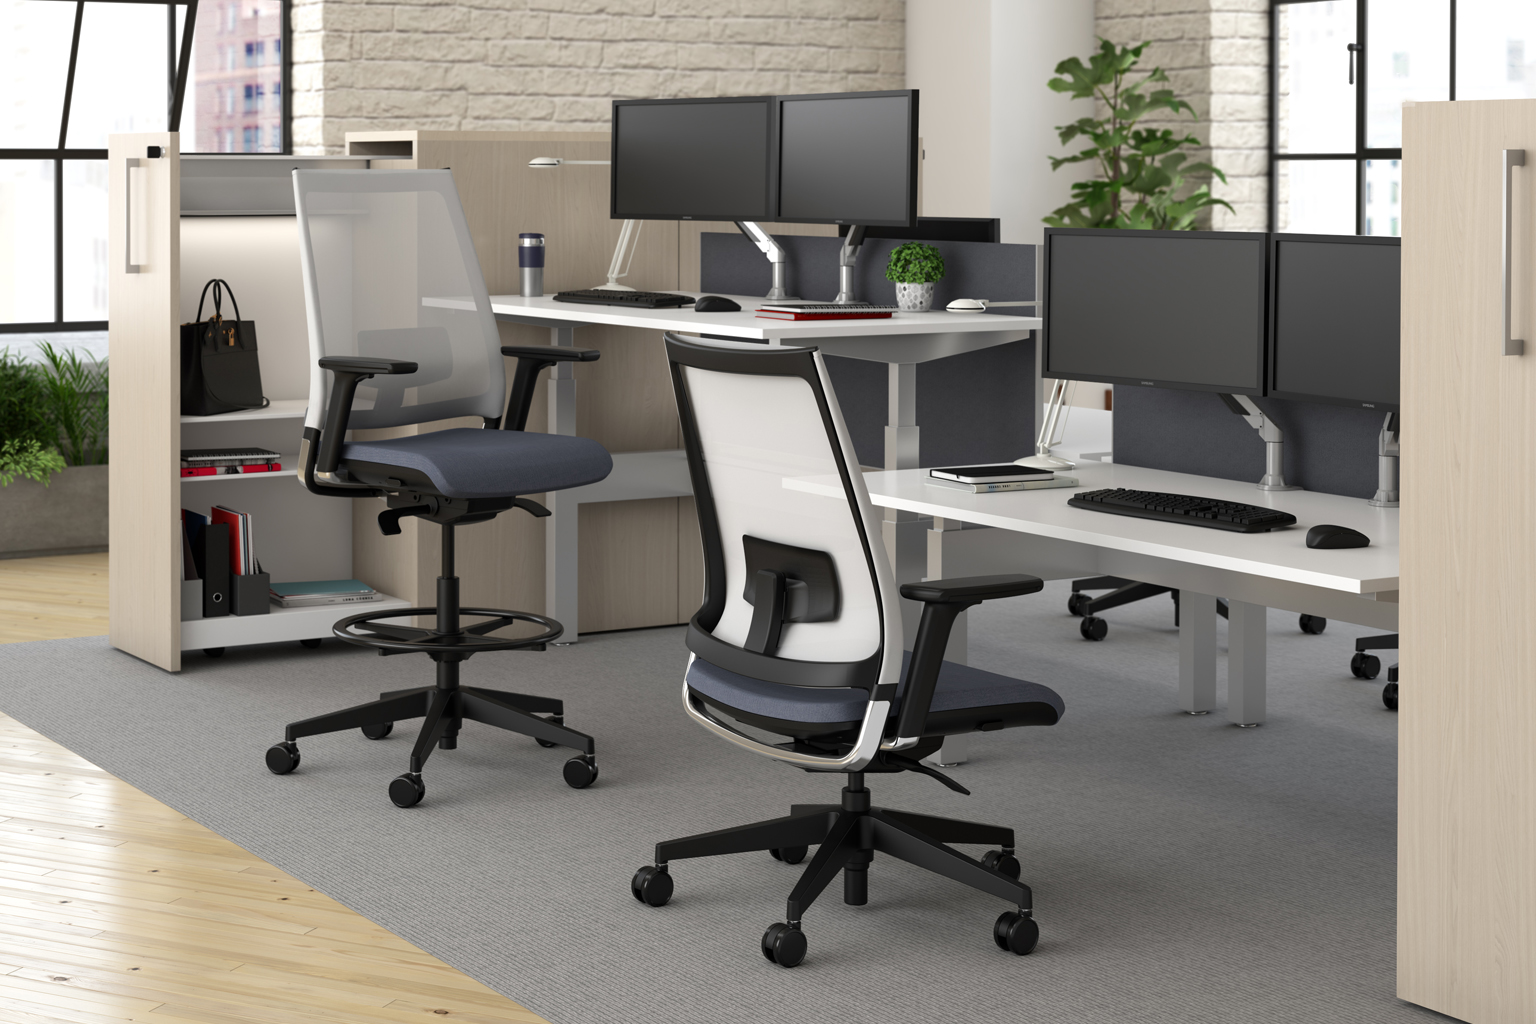 Finding Quality Used Office Furniture in San Jose缩略图